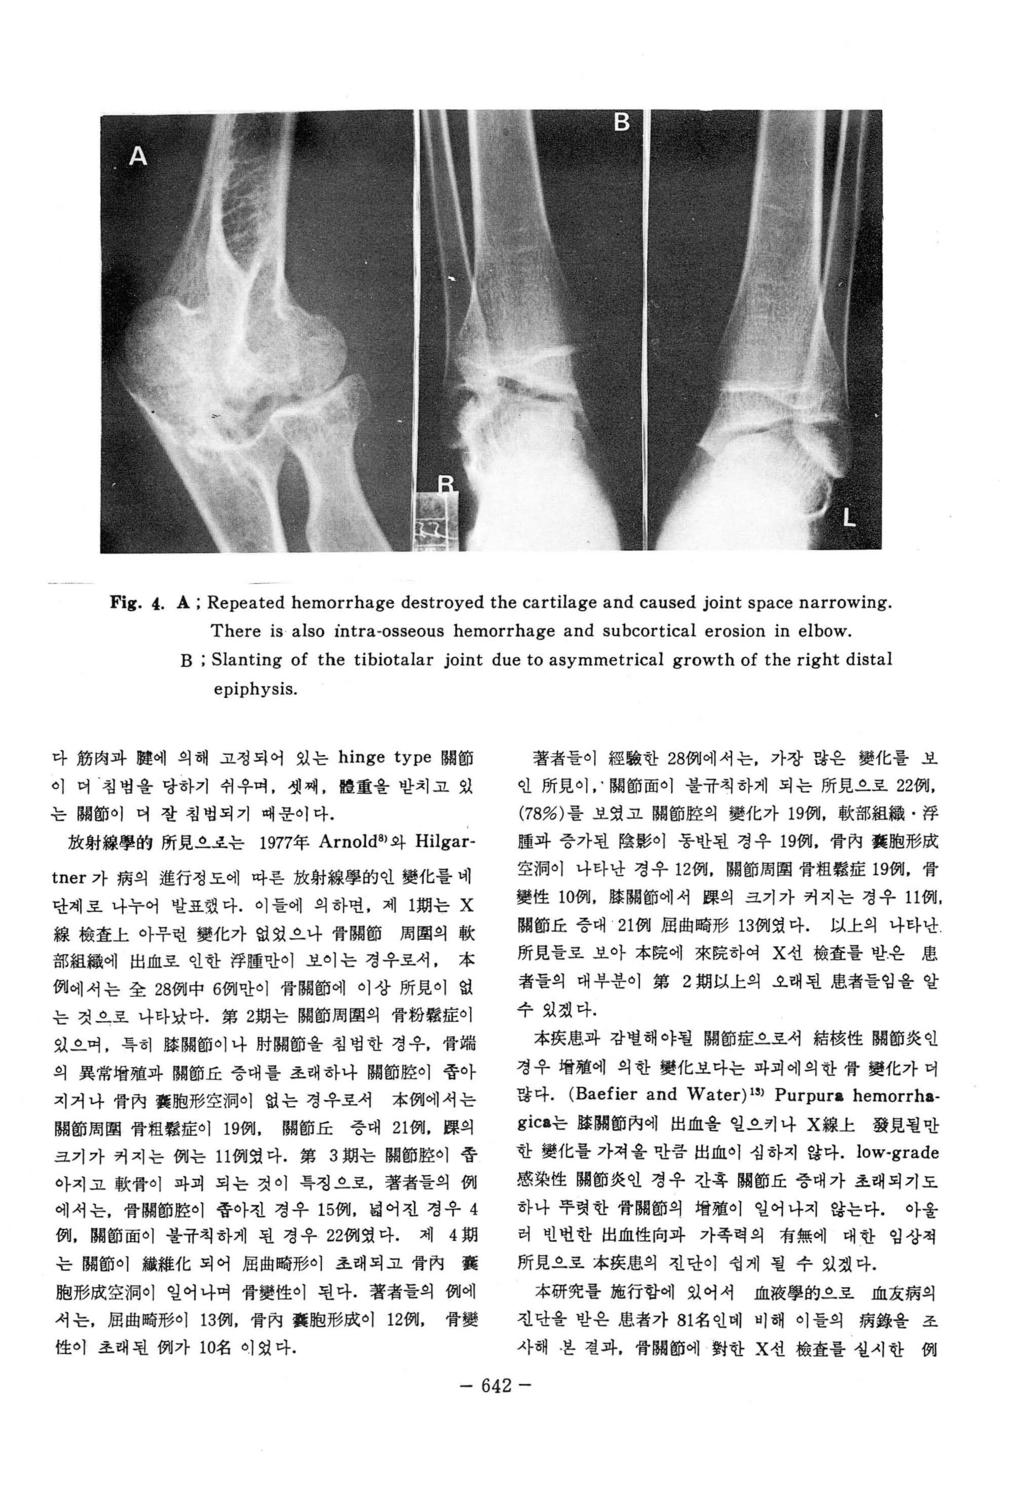 Fig. 4. A; Repeated hernorrhage destroyed the cartilage and caused joint space narrowing. There is also intra-osseous hernorrhage and subcortical erosion in elbow.